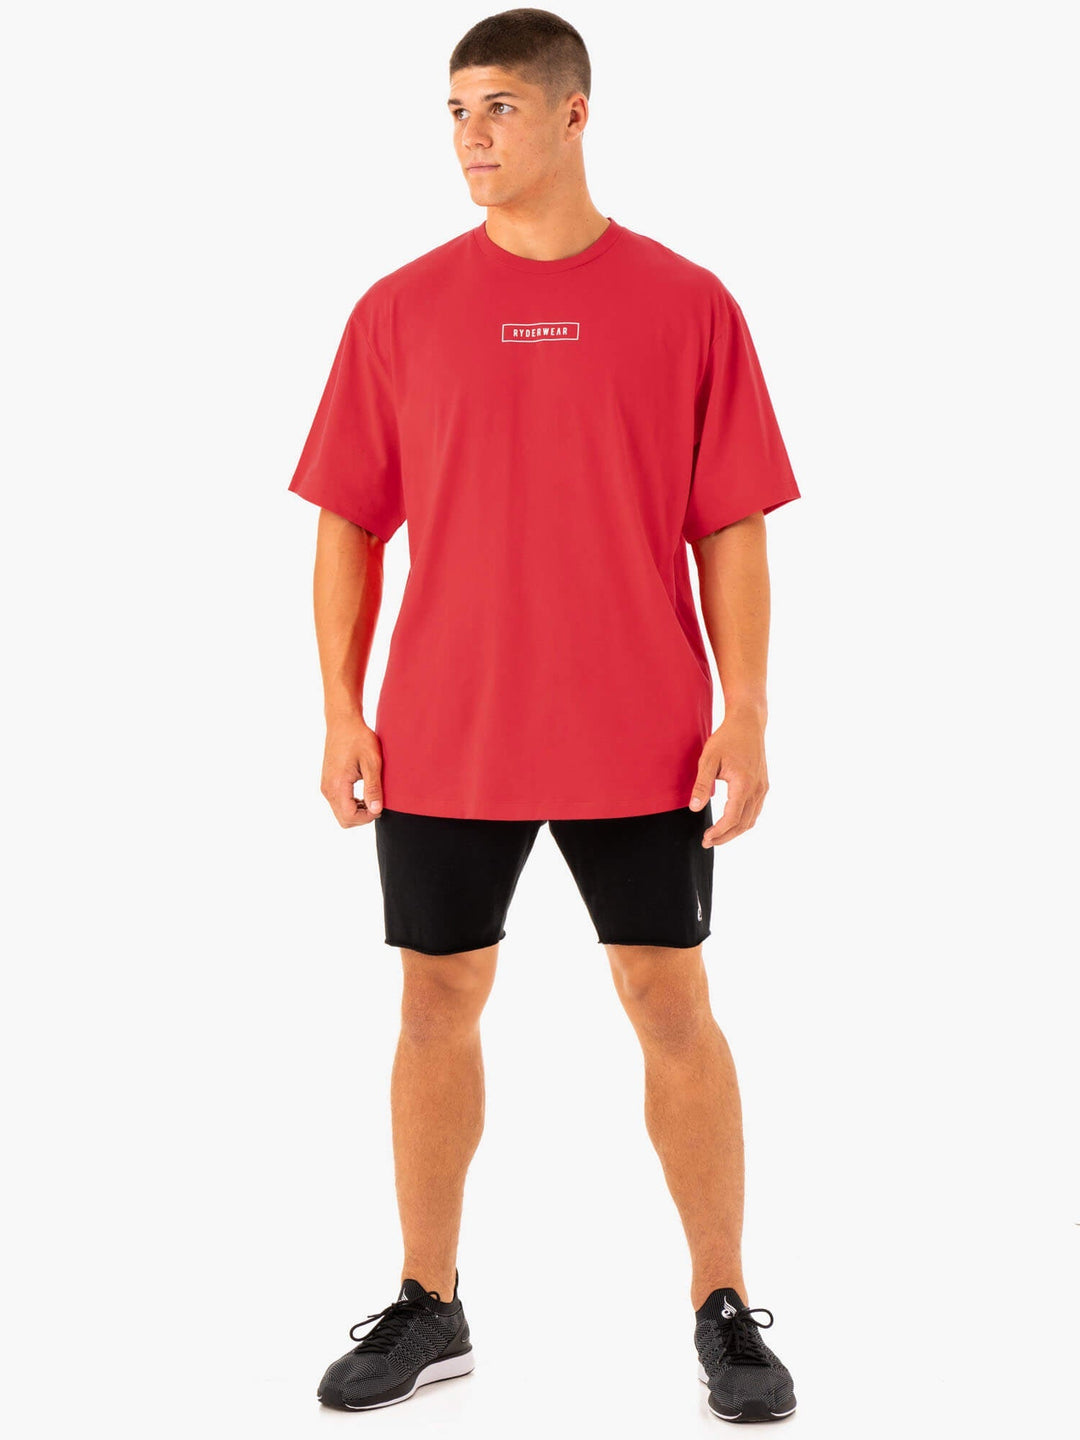 Recharge T-Shirt - Red Clothing Ryderwear 